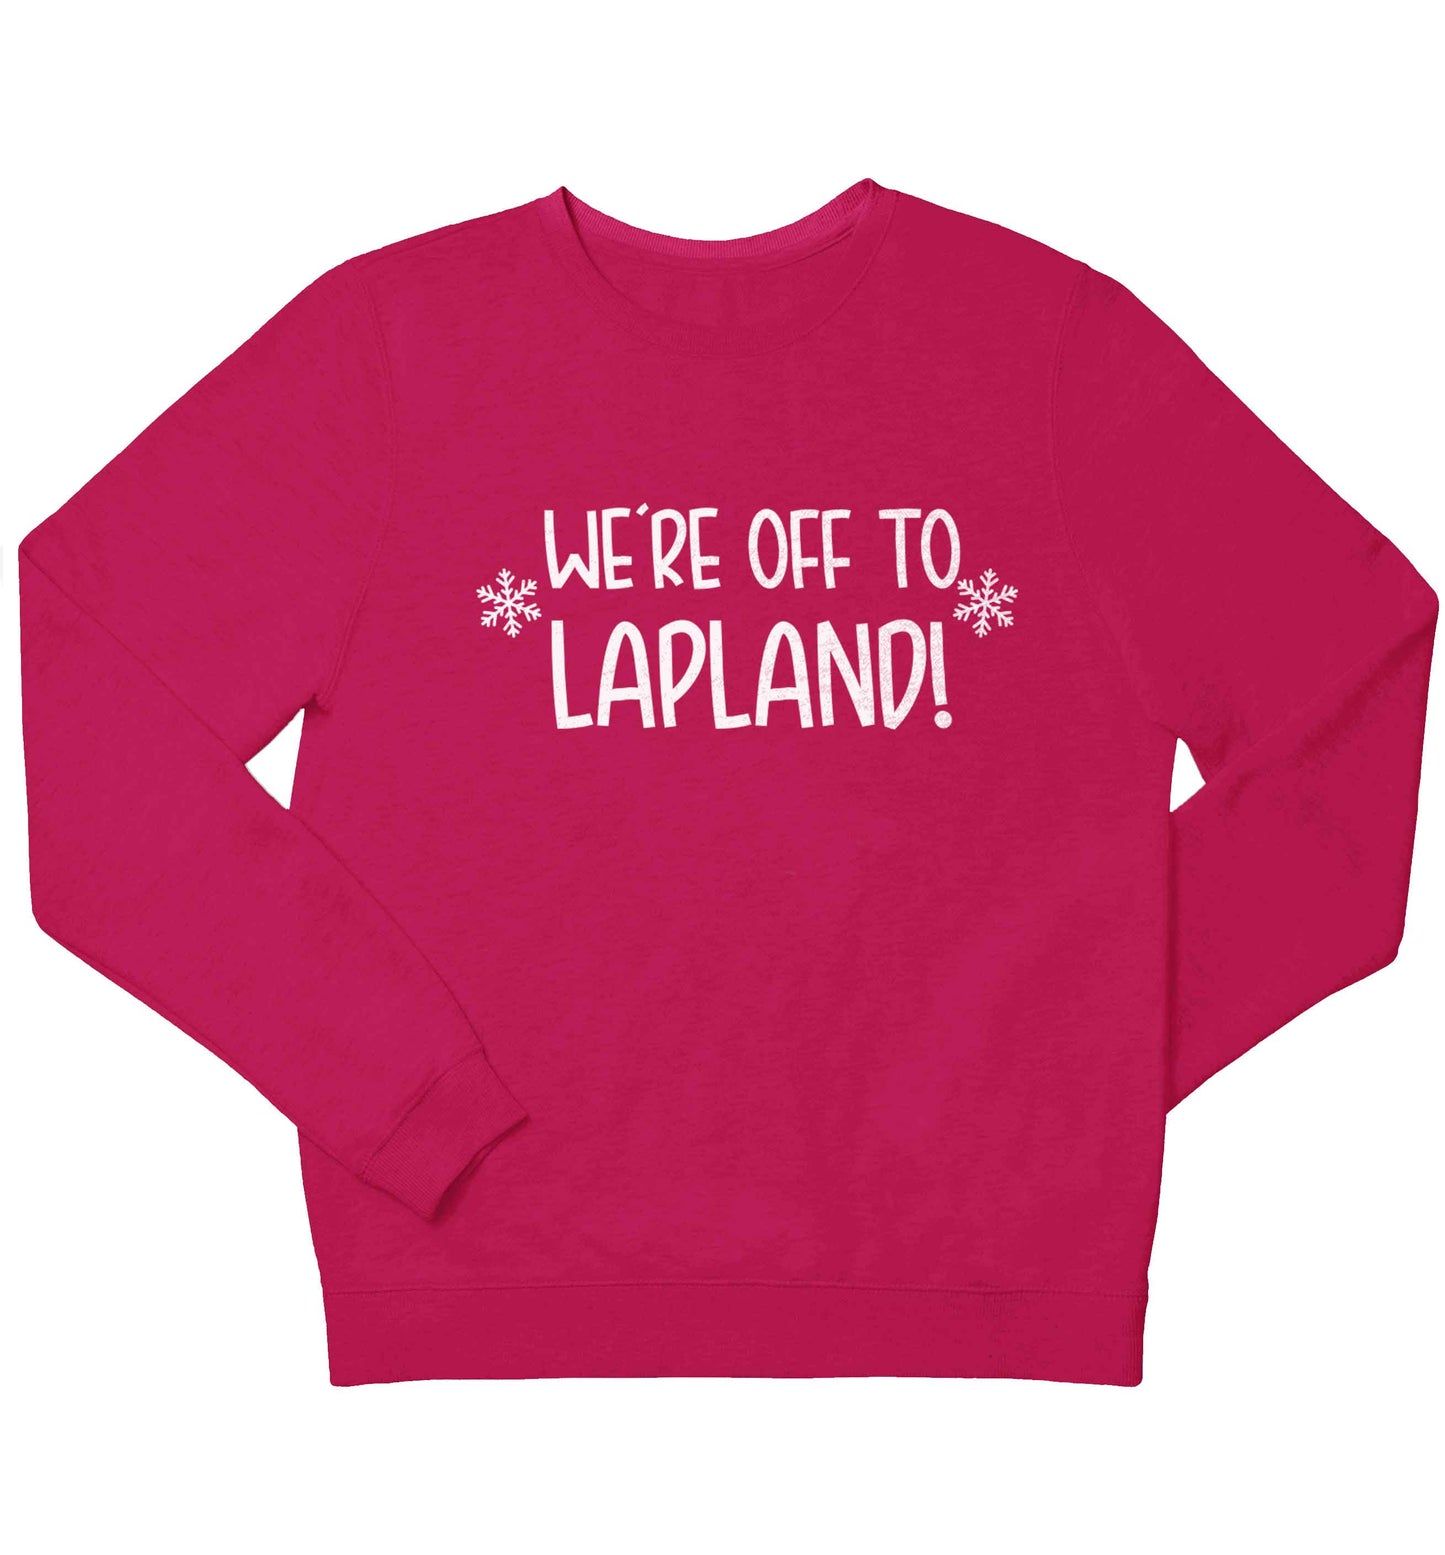 We're off to Lapland children's pink sweater 12-13 Years